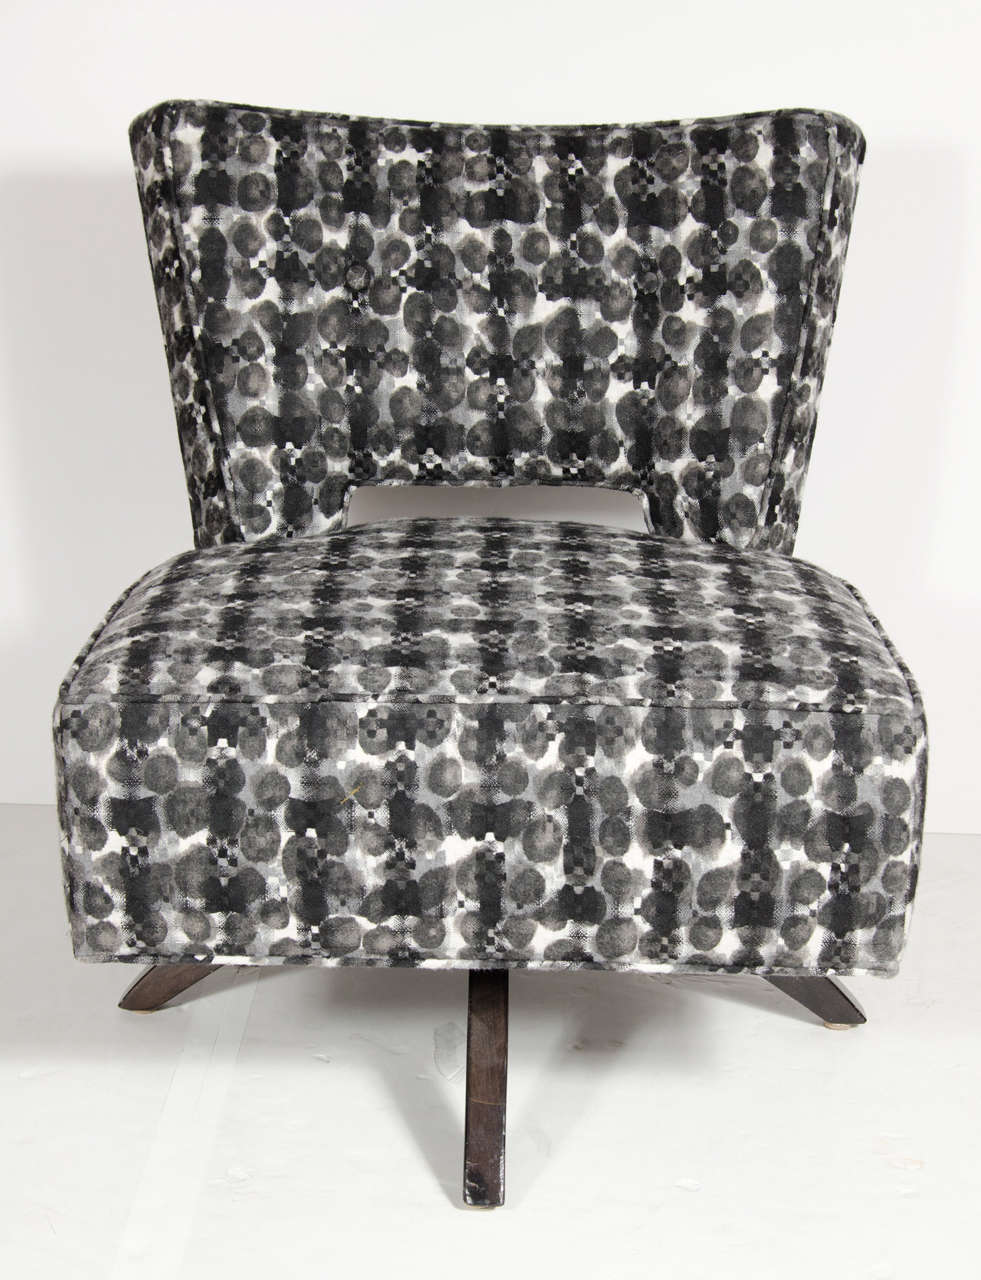 This striking Mid-Century Modern swivel slipper chair features a cut out back with textured black & white upholstery covering the entirety of the chair and back. The chair also features splayed ebonized walnut legs . This modernist design makes for